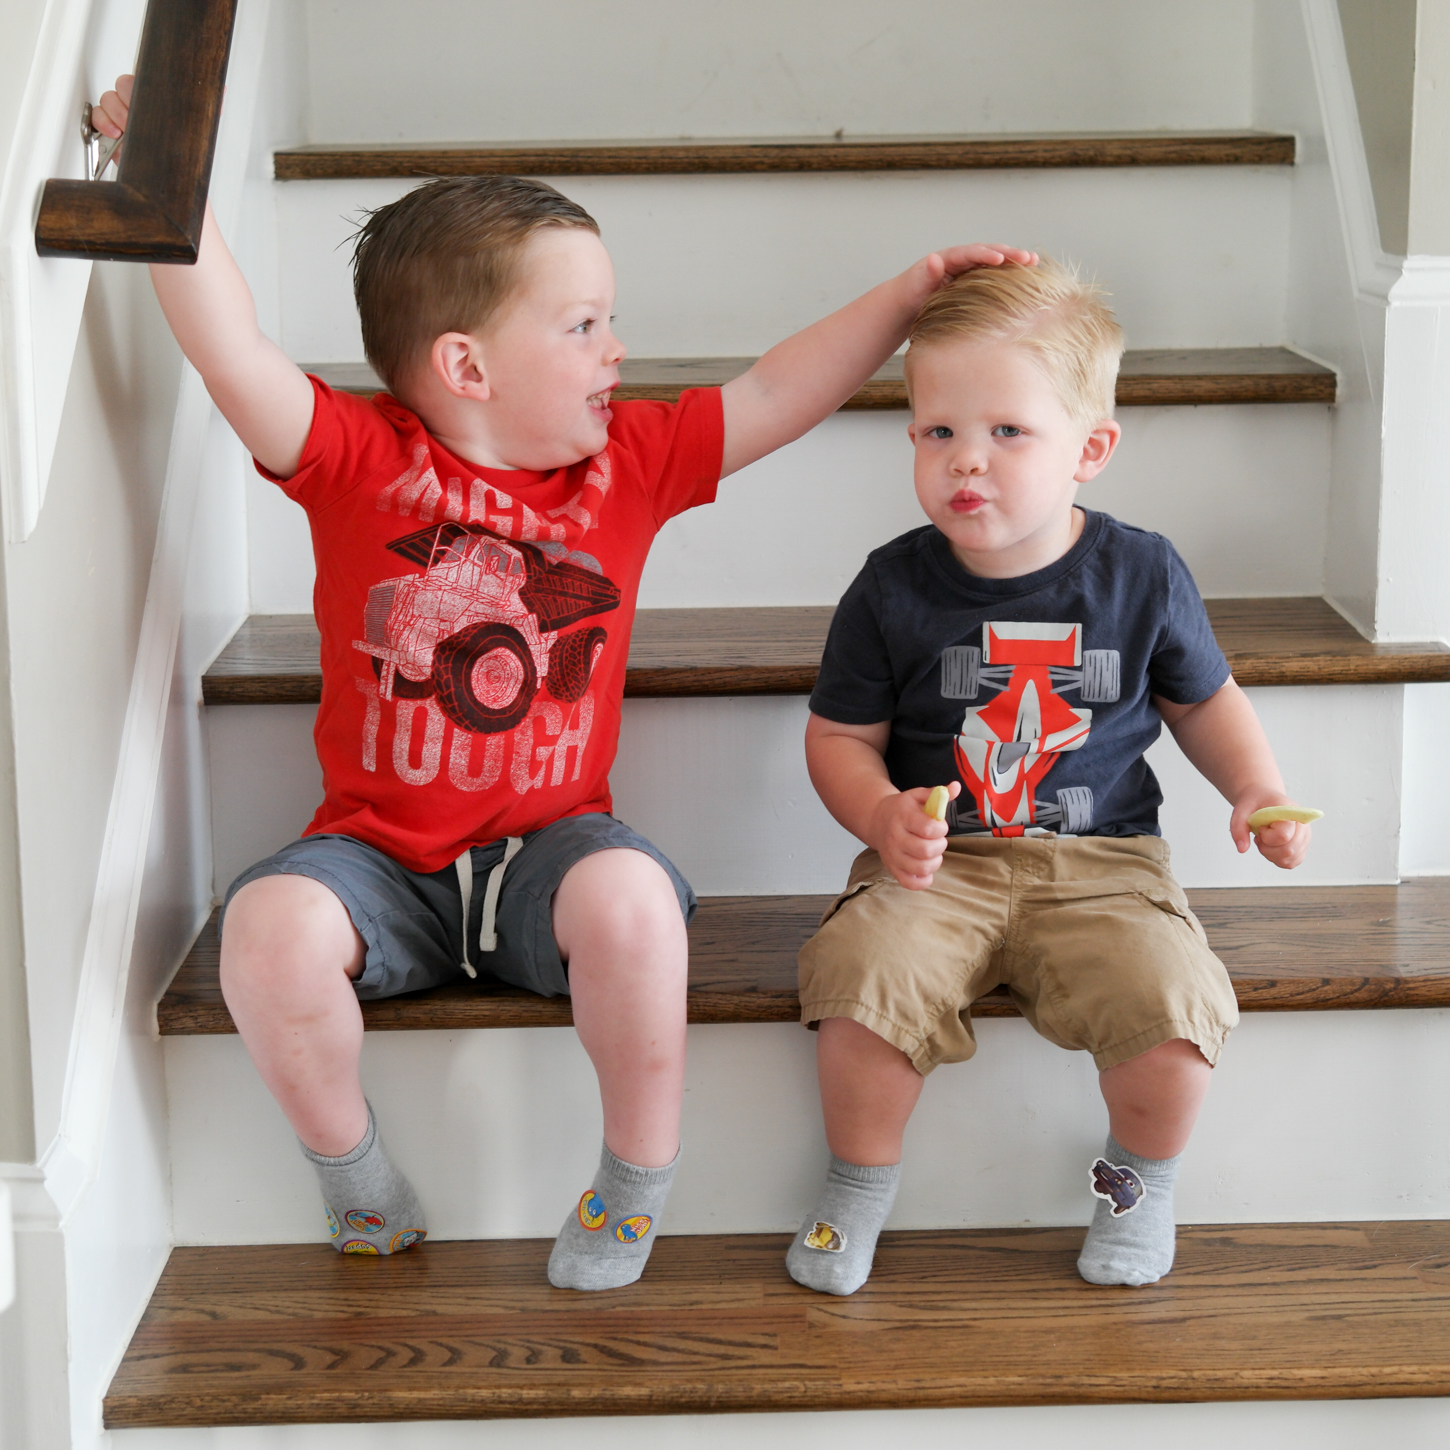 How I style my little boys' hair – The Small Things Blog